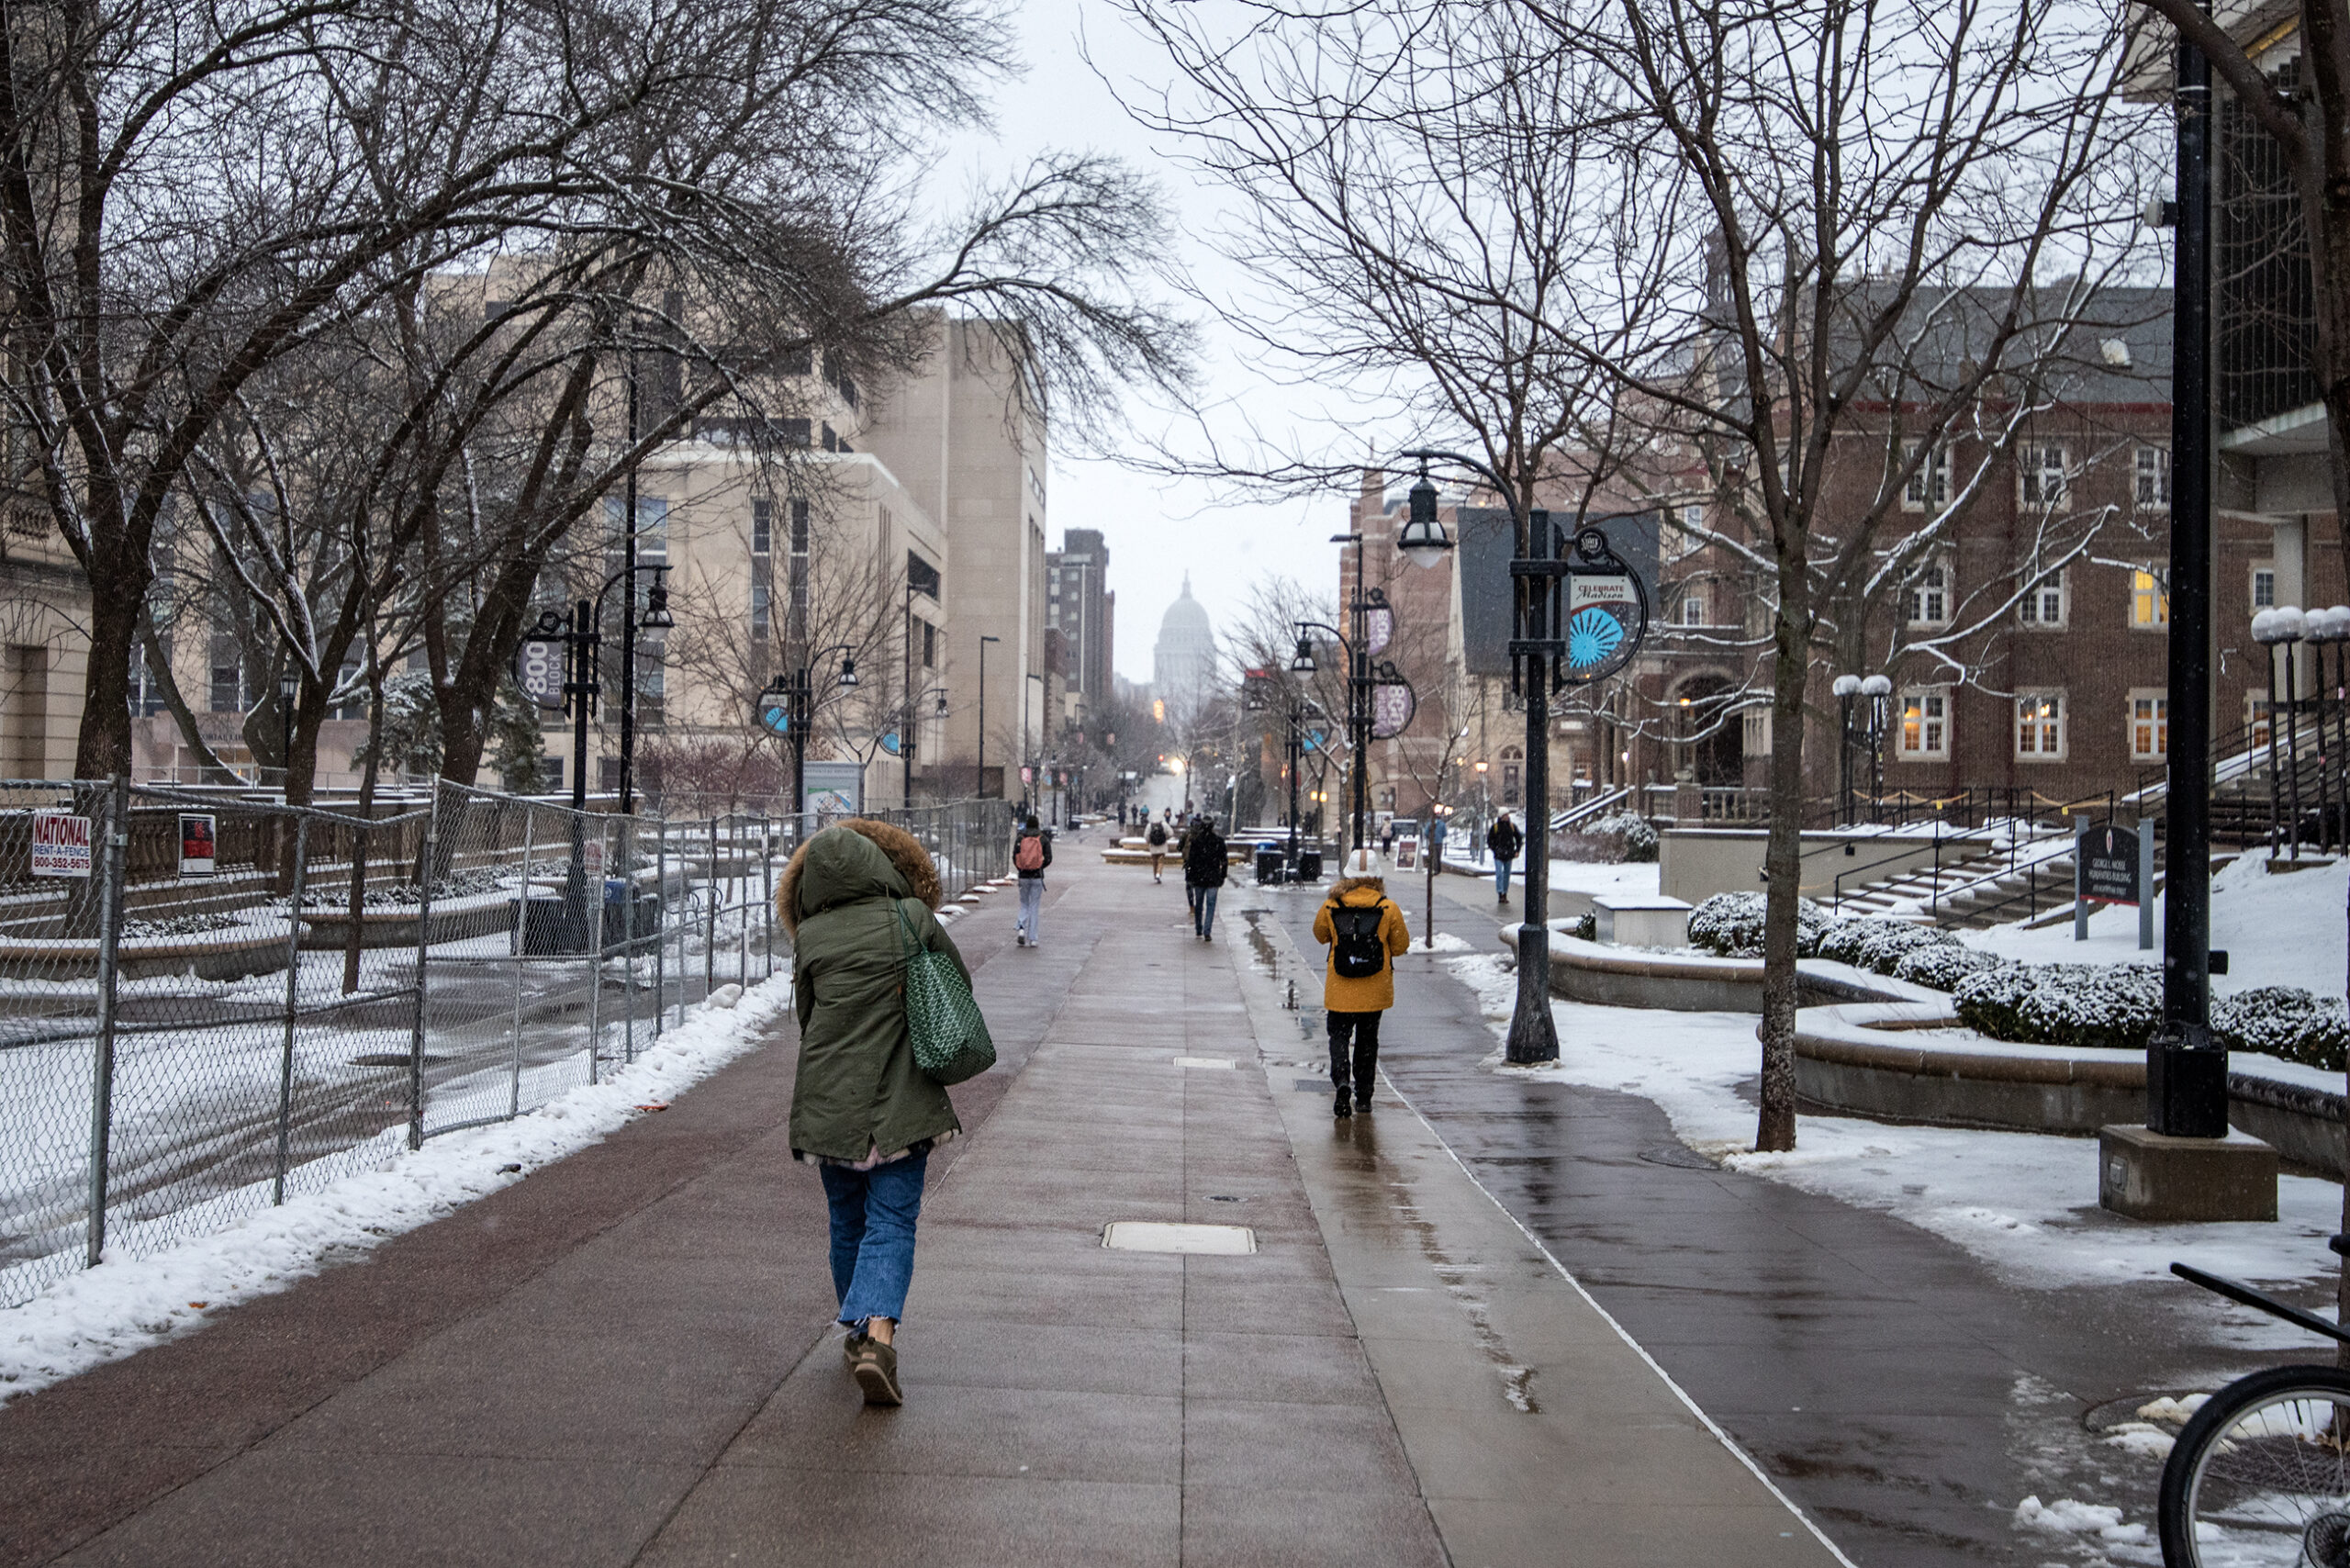 Students walk outside on a sidewalk while wearing coats. The Wisconsin State Capitol can be seen in the background.